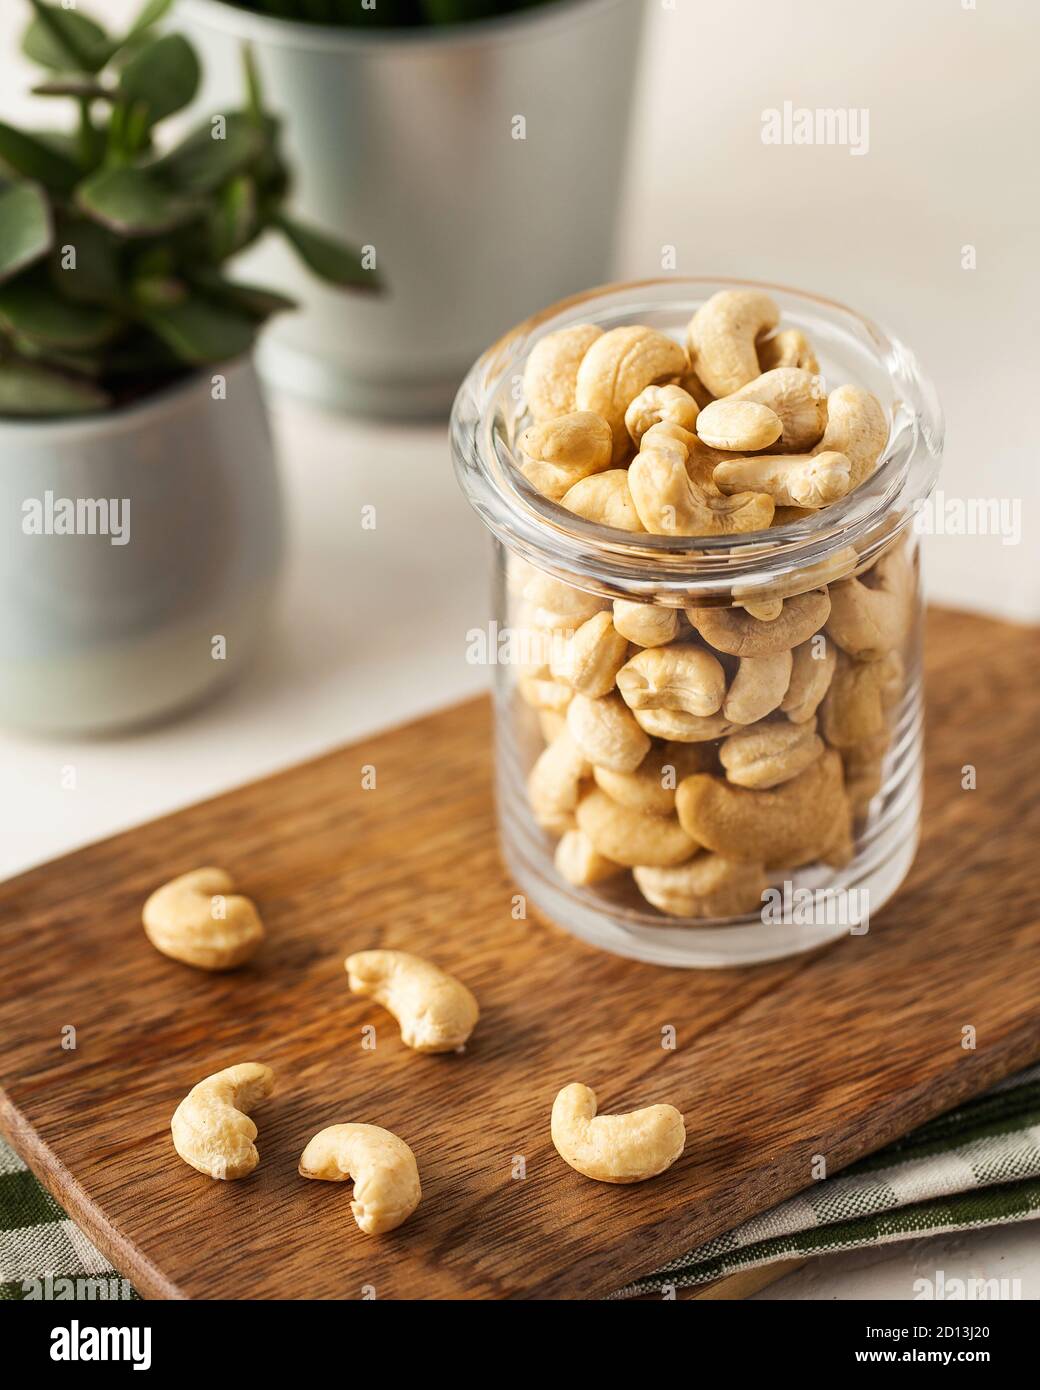 A lot of cashew nuts in a glass container on a wooden Board on a light background. green plants in pots. Stock Photo